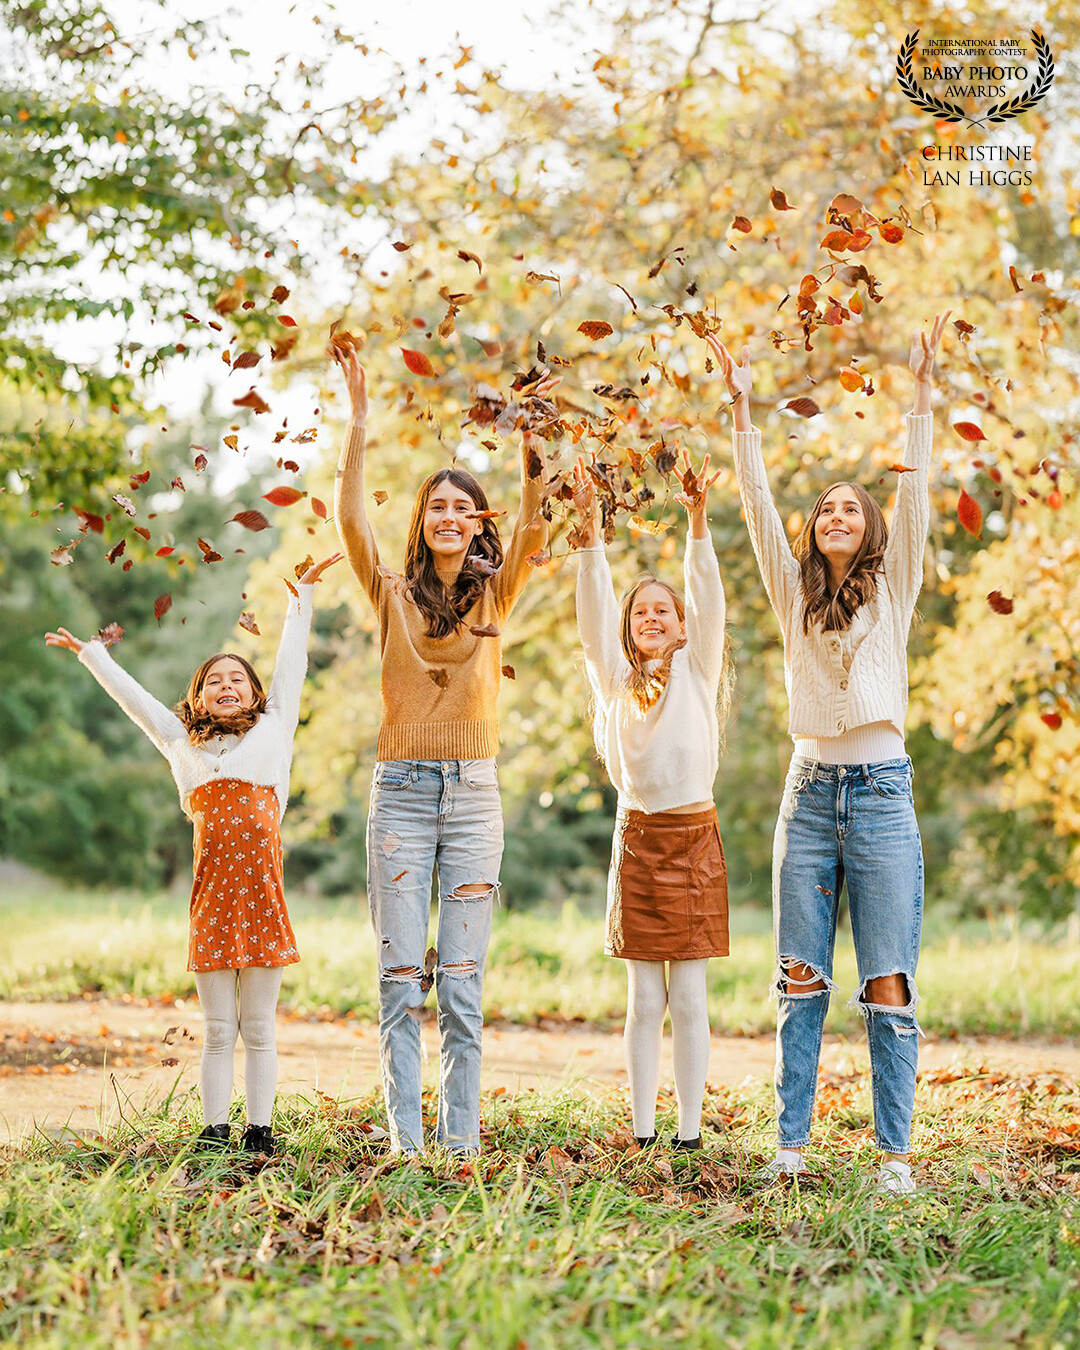 The four siblings, with two being twins, enjoyed a wonderful time playing amid the autumn leaves. The strong bond of sisterhood is truly remarkable, ensuring that these girls will have lifelong built-in best friends.